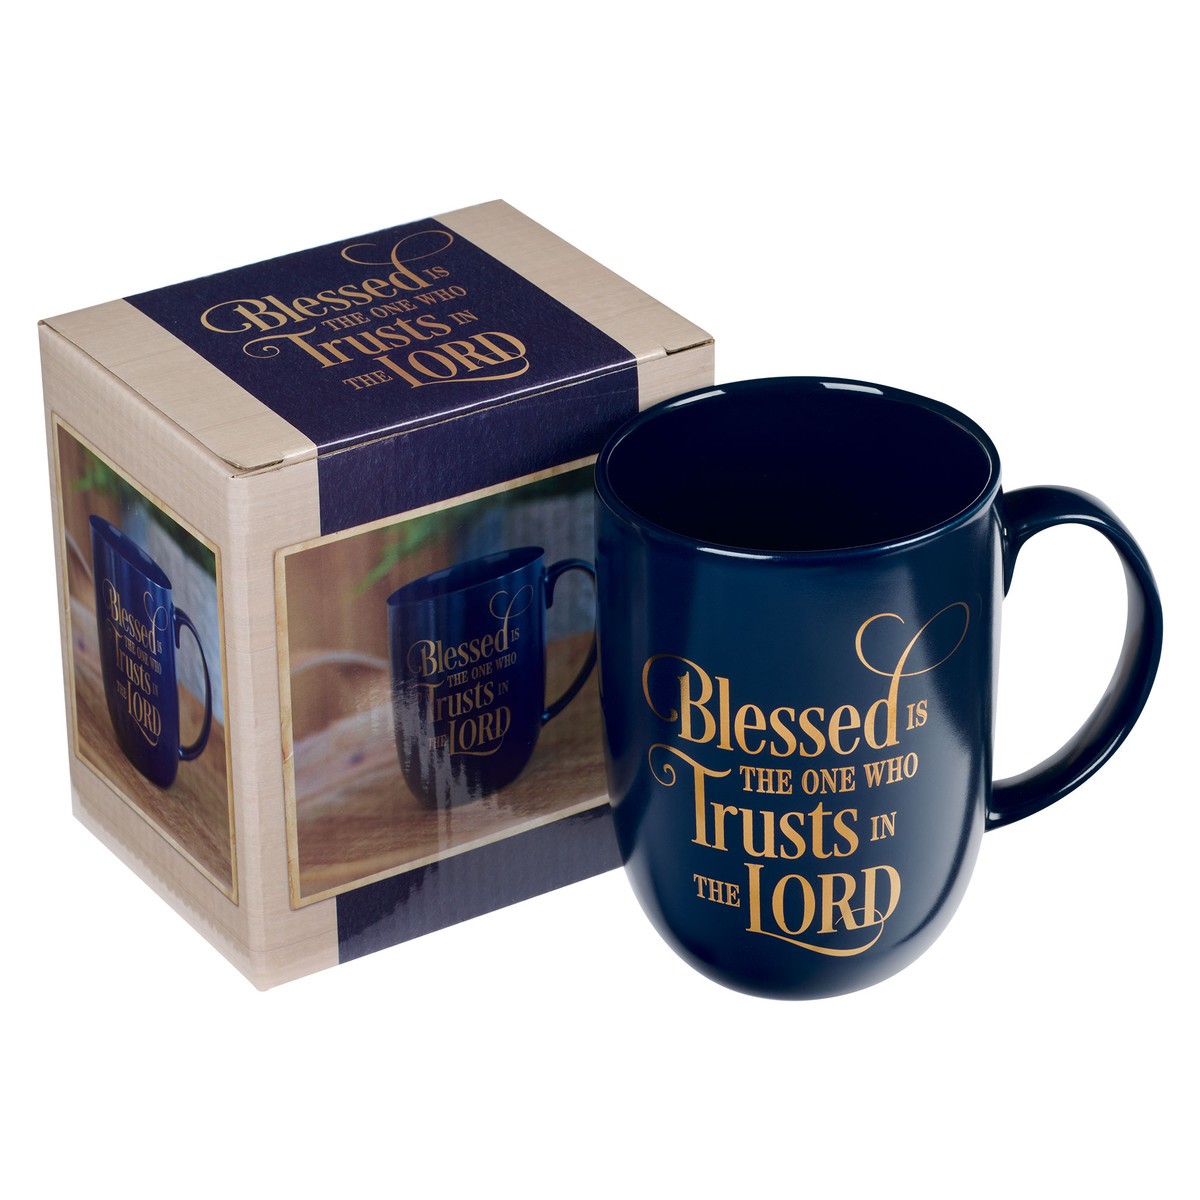 Impossible Is God's Starting Point Mug - 12 Units - Bulk Discount